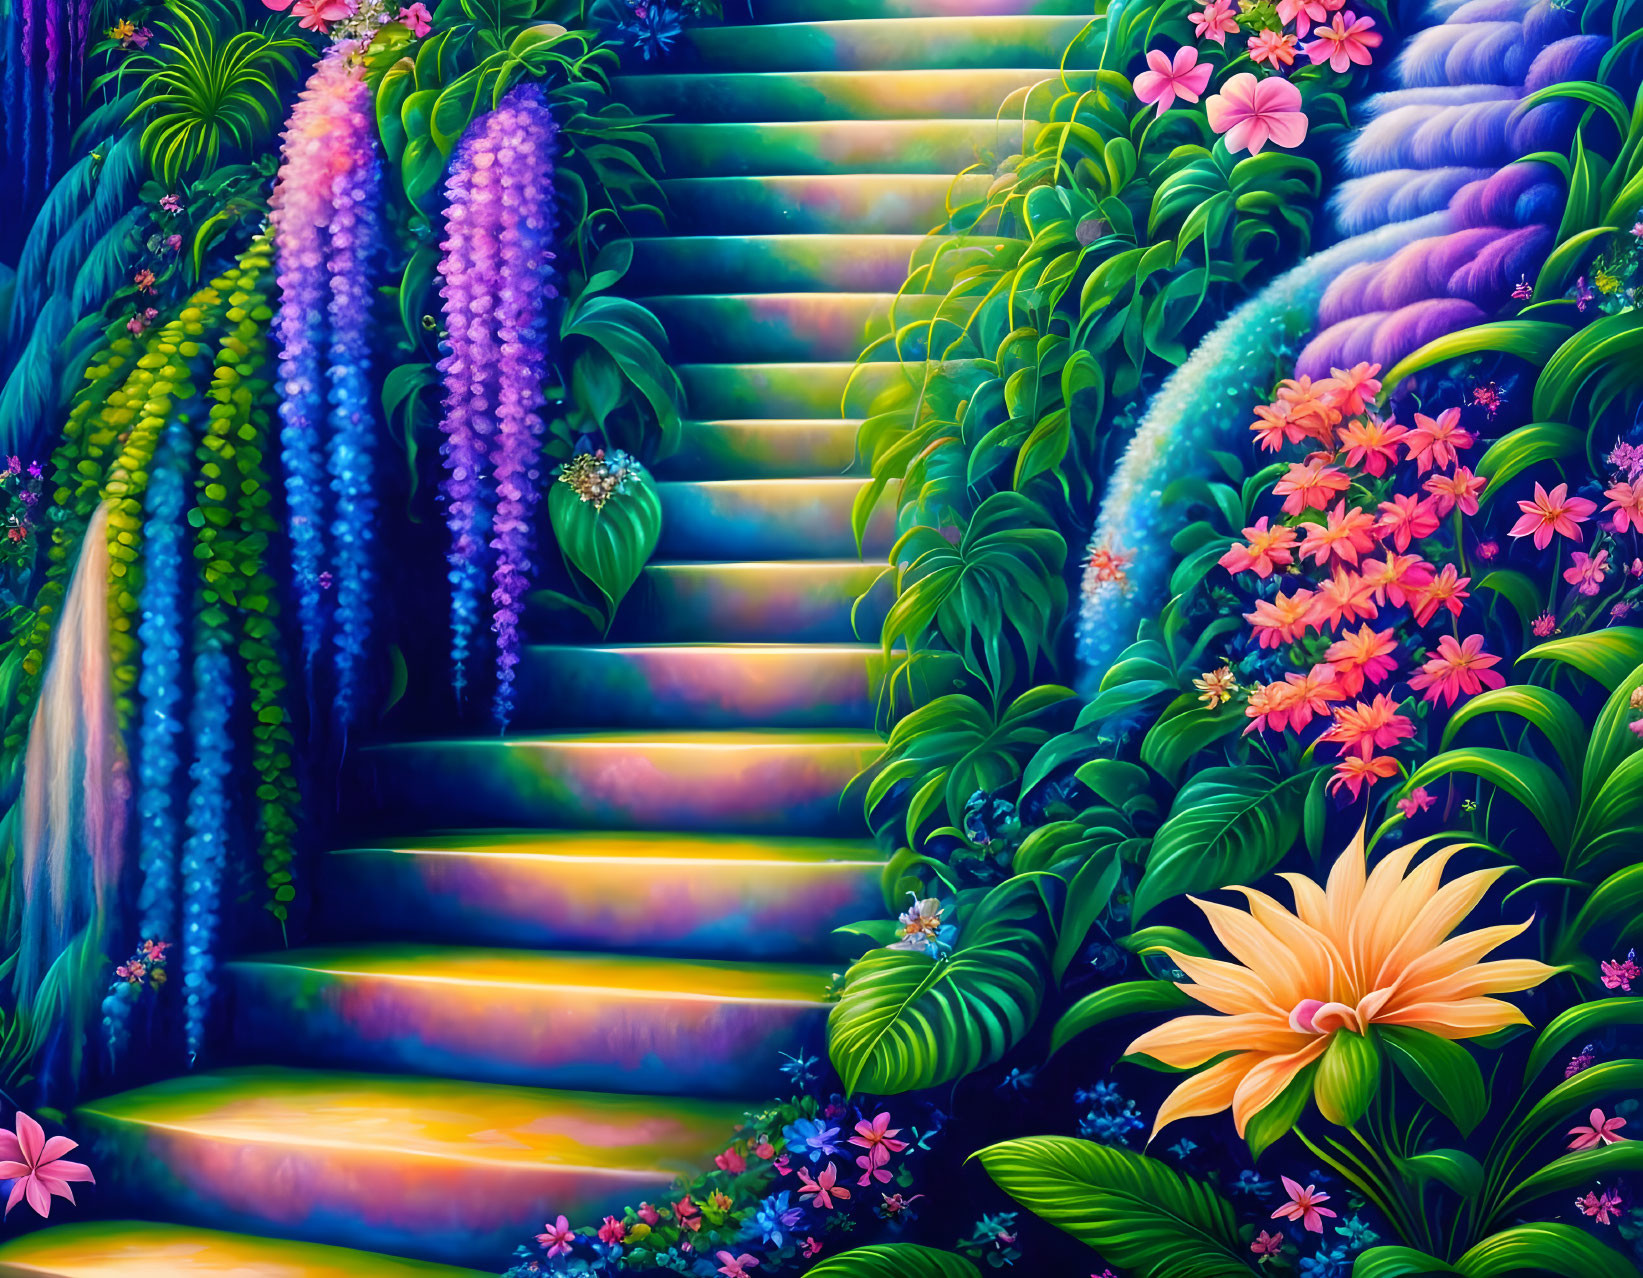 Colorful Staircase Surrounded by Lush Foliage and Flowers